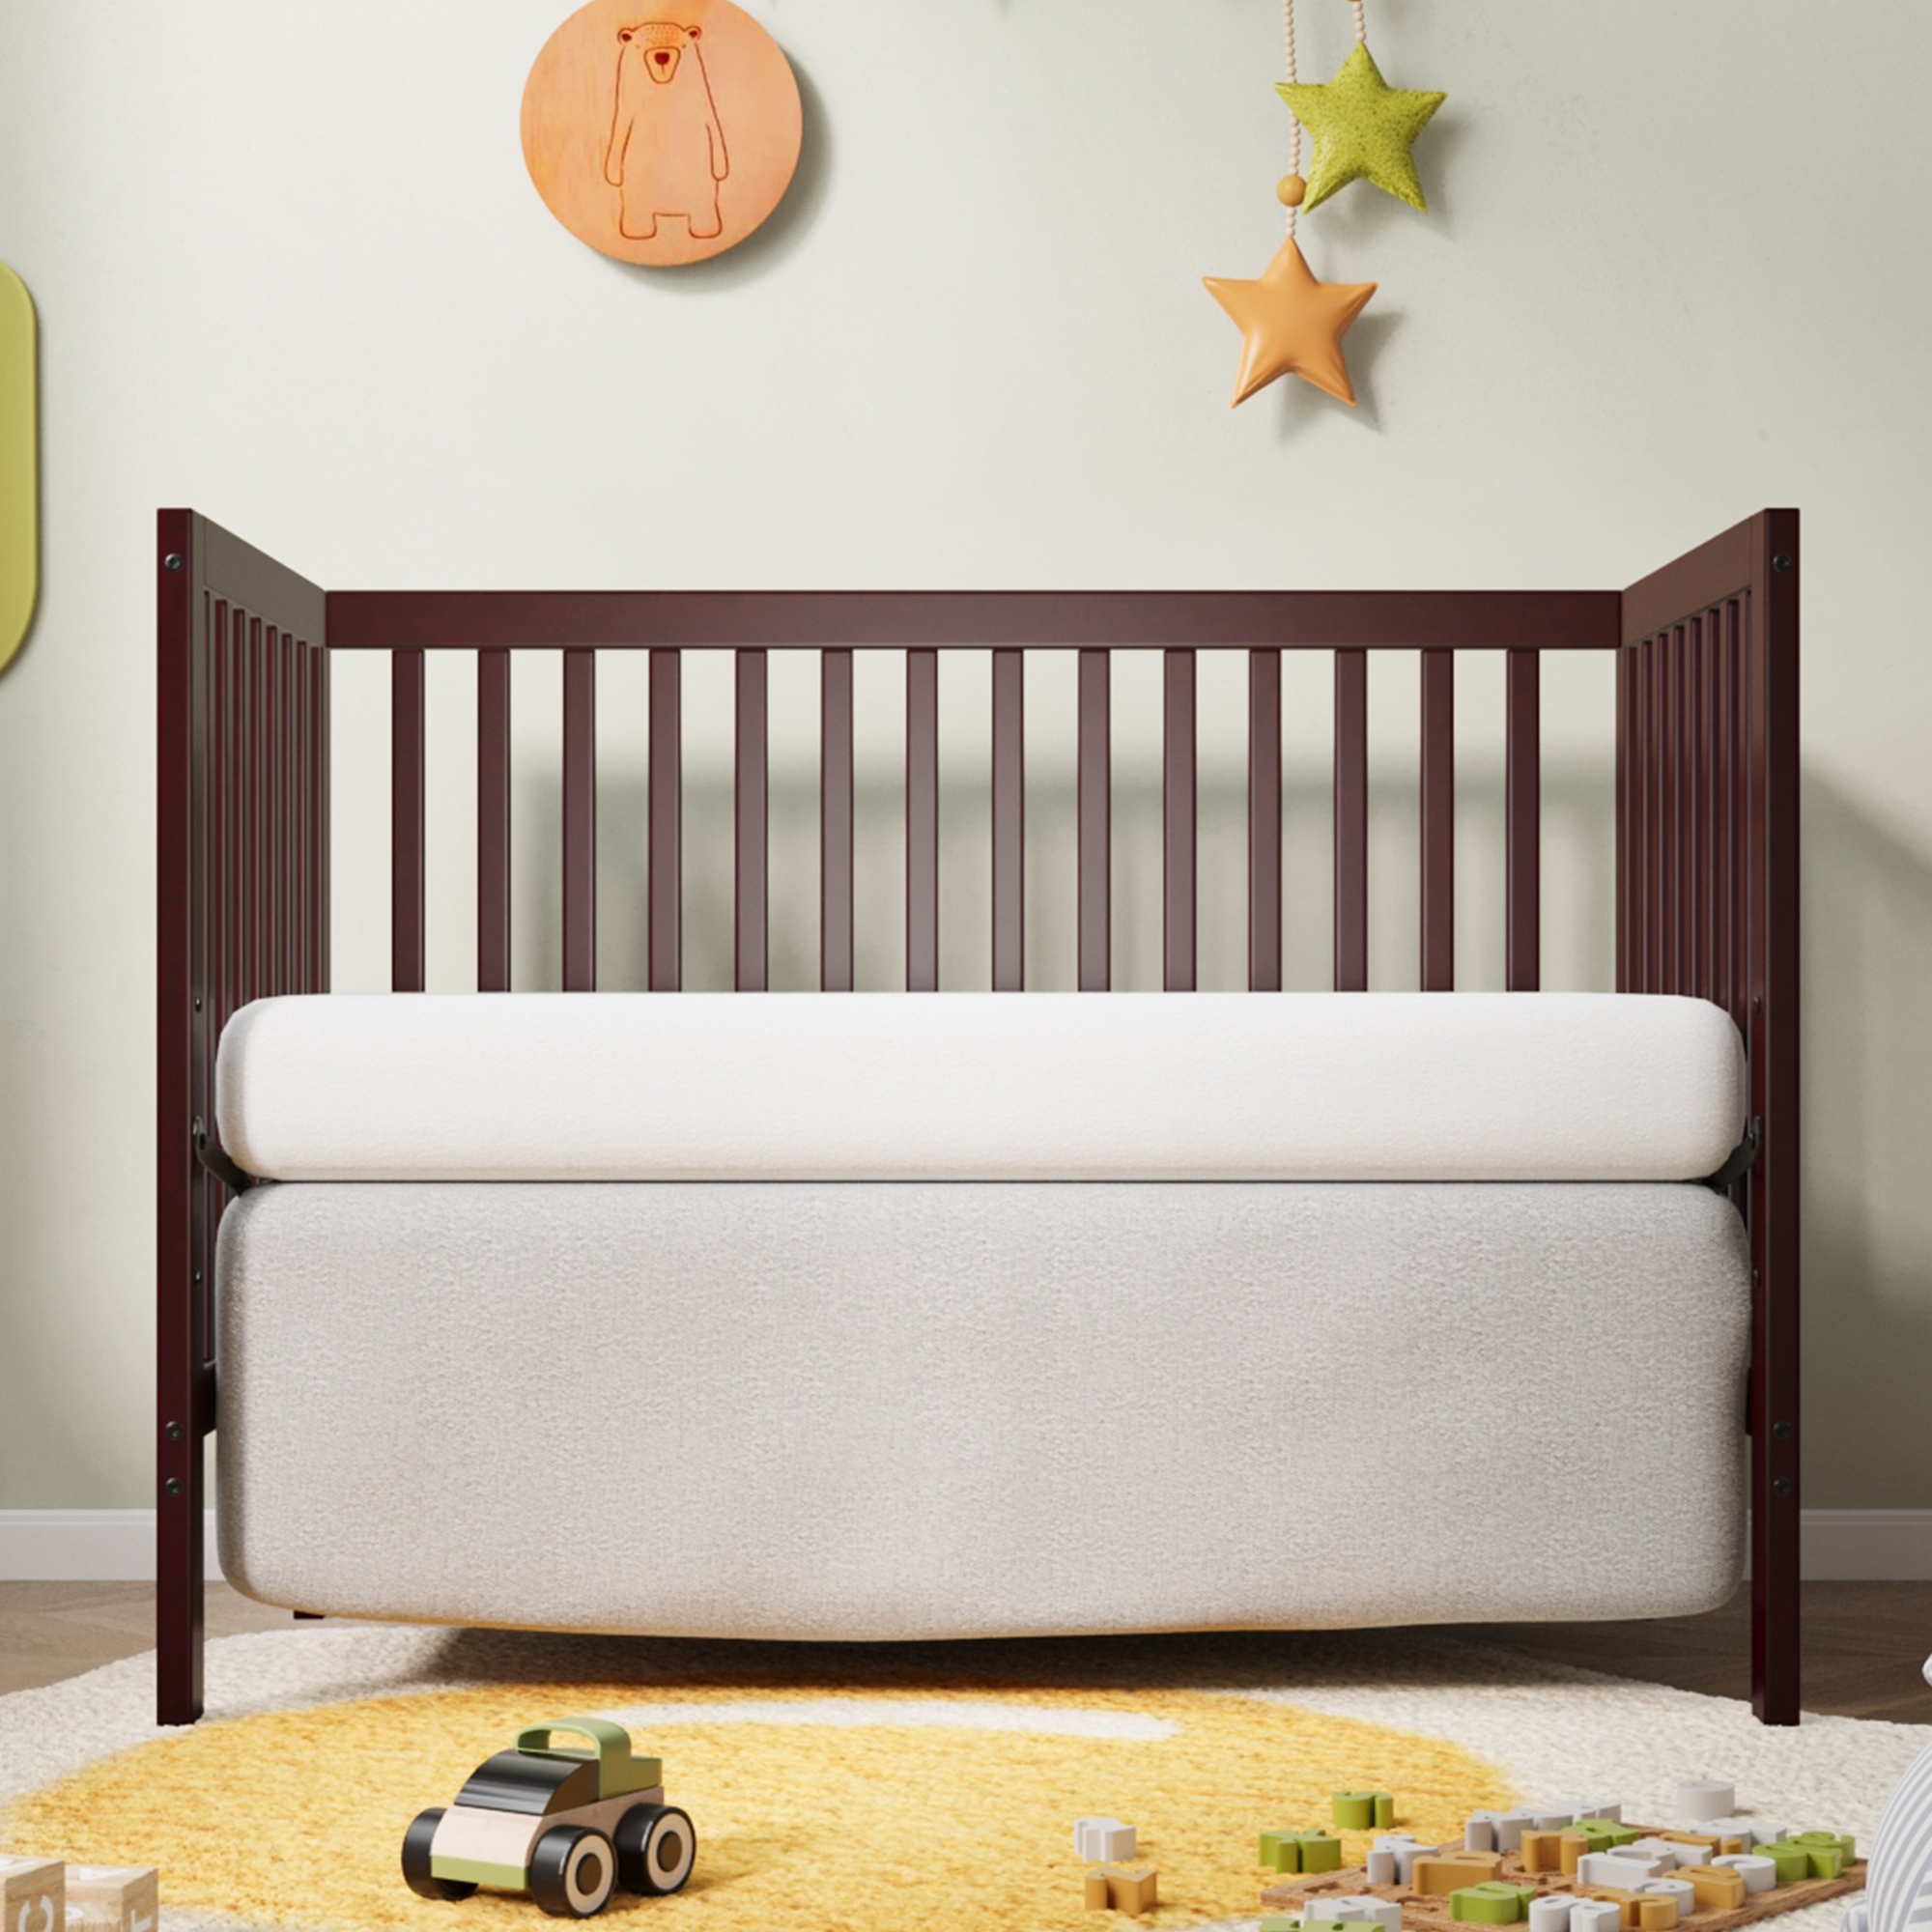 Sesslife 5-In-1 Convertible Crib, Baby Bed, Converts from Baby Crib to Toddler Bed, Fits Standard Full-Size Crib Mattress ,Easy to Assemble(Espresso) - image 3 of 11